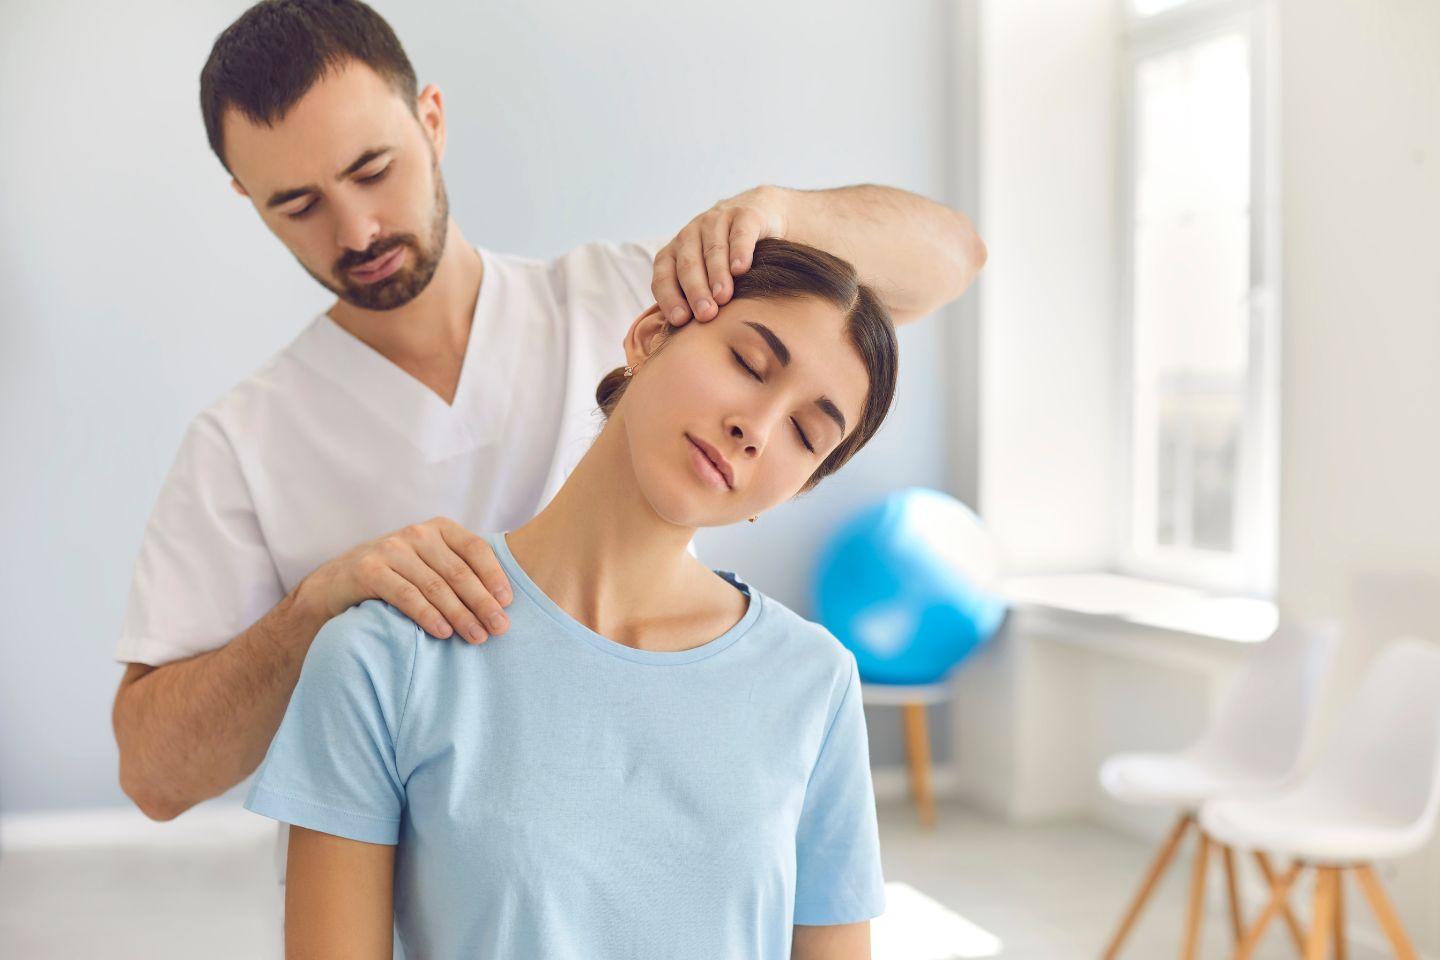 Management of Neck Pain in Women